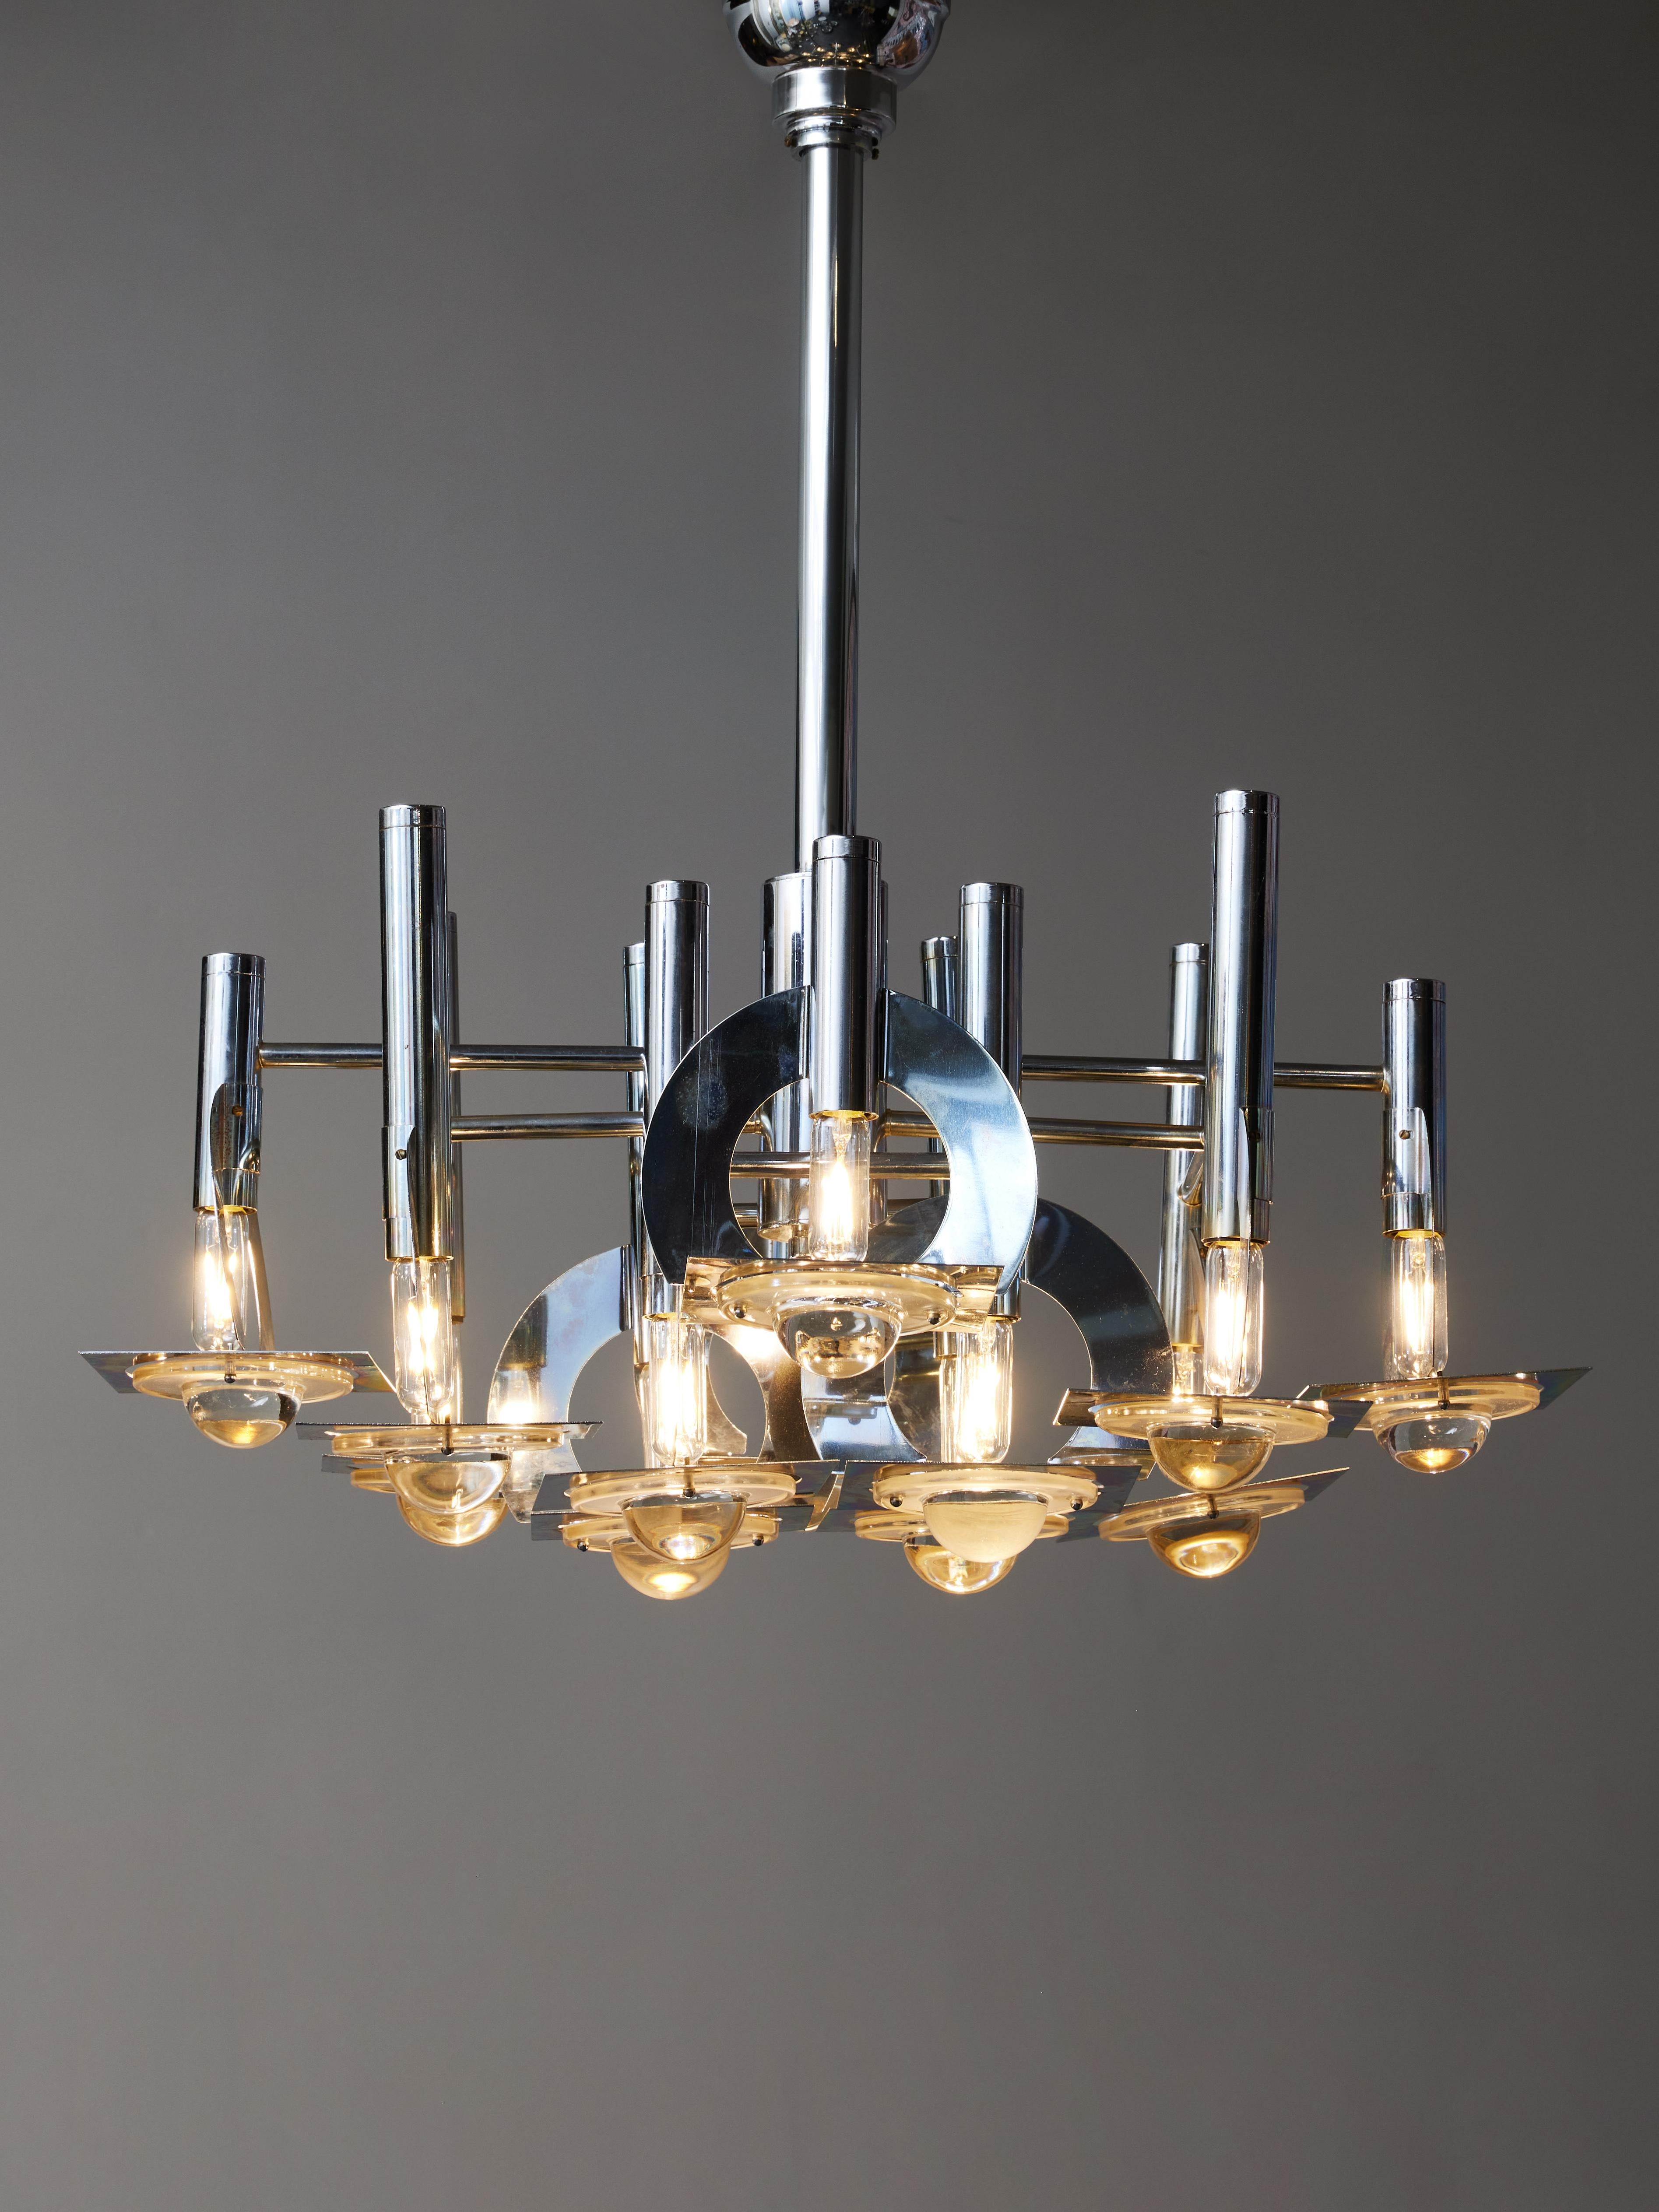 Three vintage chandelier by Oscar Torlasco for the manufacturer Lumi Milano, made of a steel structure, twelve ams of light and glass lenses diffusers.

Oscar Torlasco (1934-2004)
Oscar Torlasco is an Italian designer who concentrated most of his